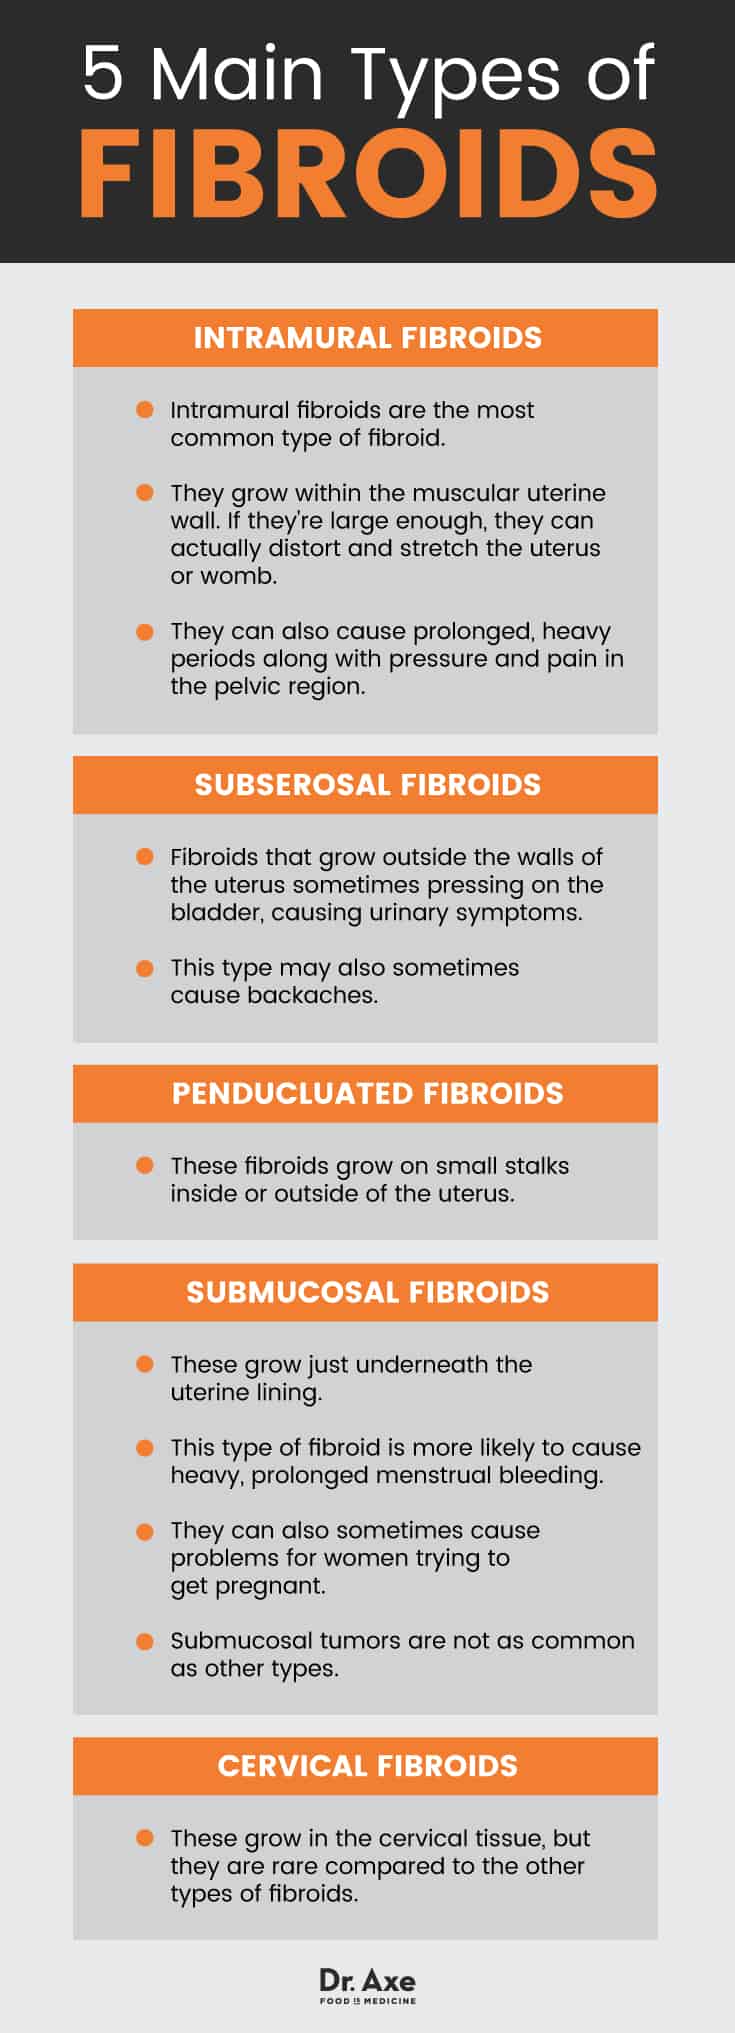 5 types of fibroids - Dr. Axe